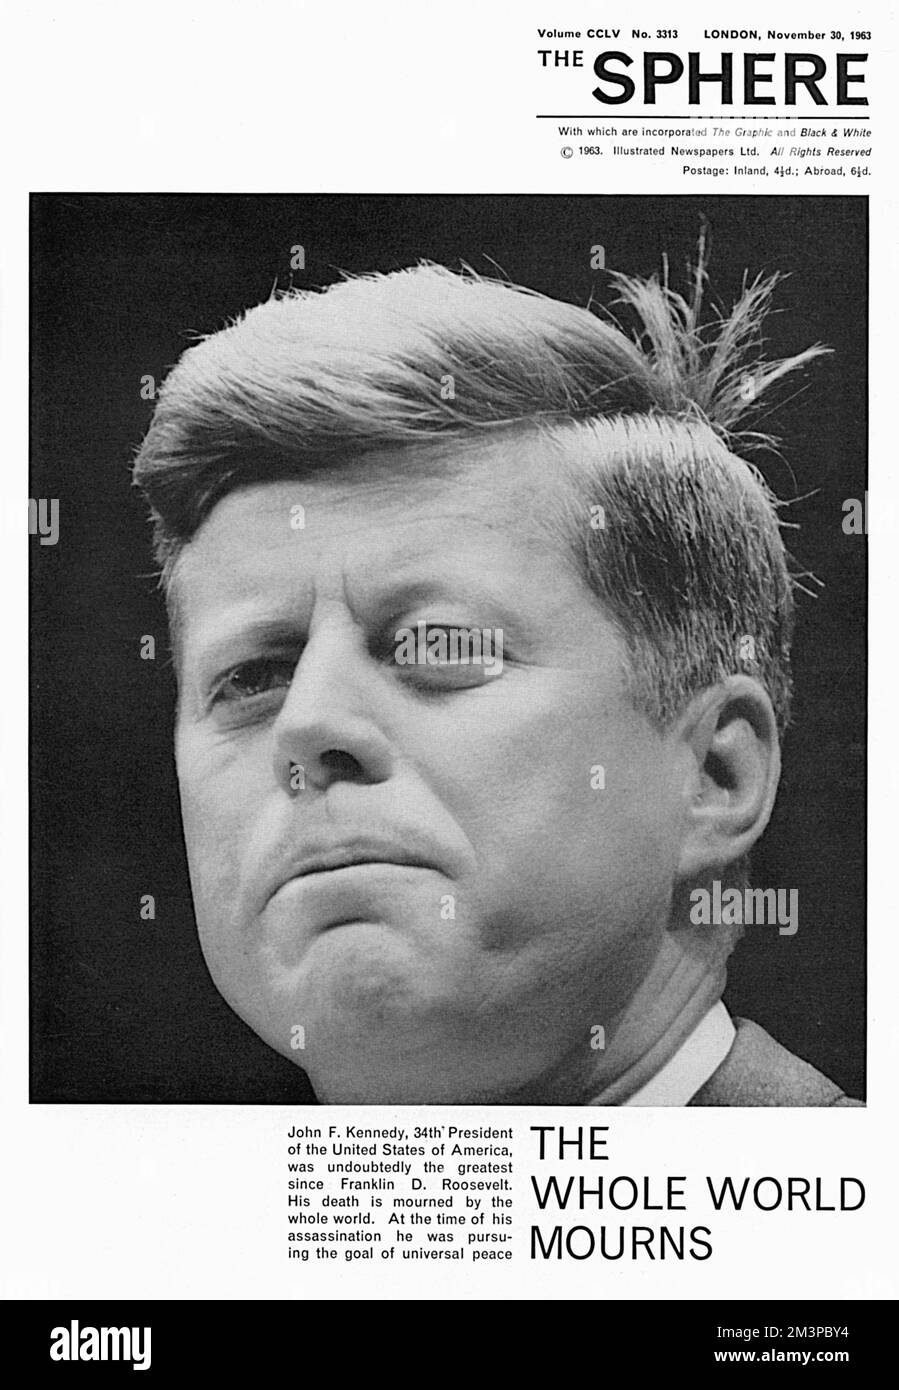 Front cover of The Sphere magazine reporting on the assassination of the 35th President of the United States, John Franklin Kennedy on 22 November 1963 in Dallas, Texas.  The magazine incorrectly states that he was the 34th President.     Date: 1963 Stock Photo